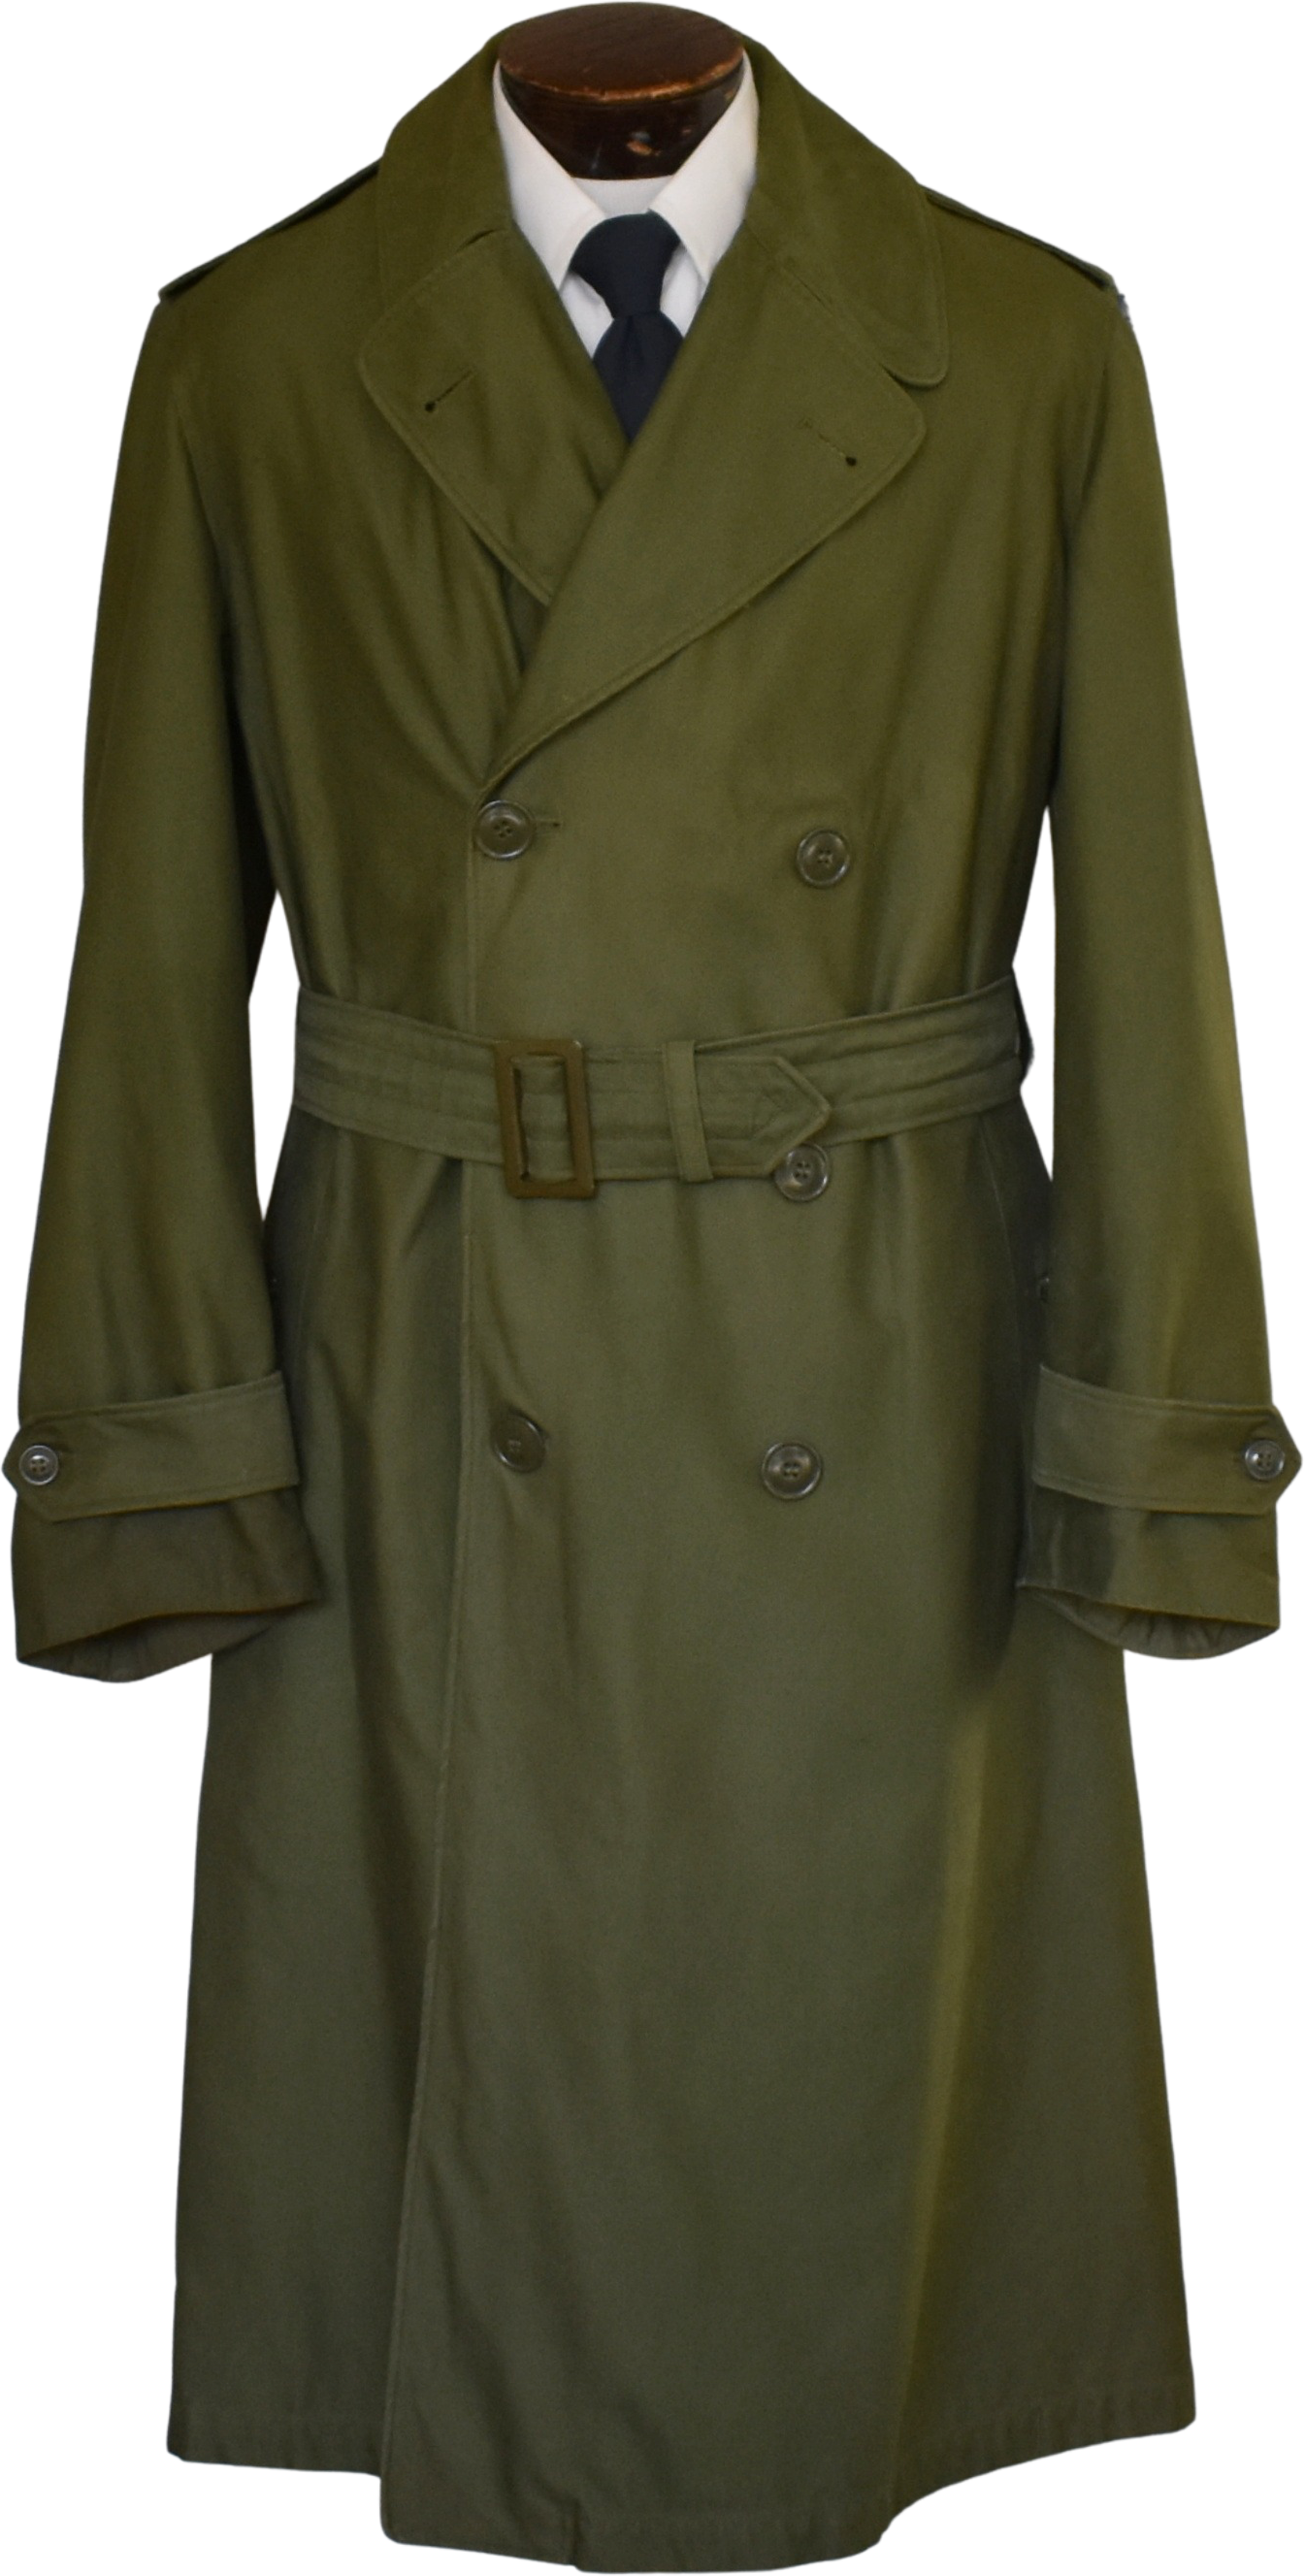 Cilia cafetaria Goot Vintage 50's Us Army Military Trench Coat | Shop THRILLING